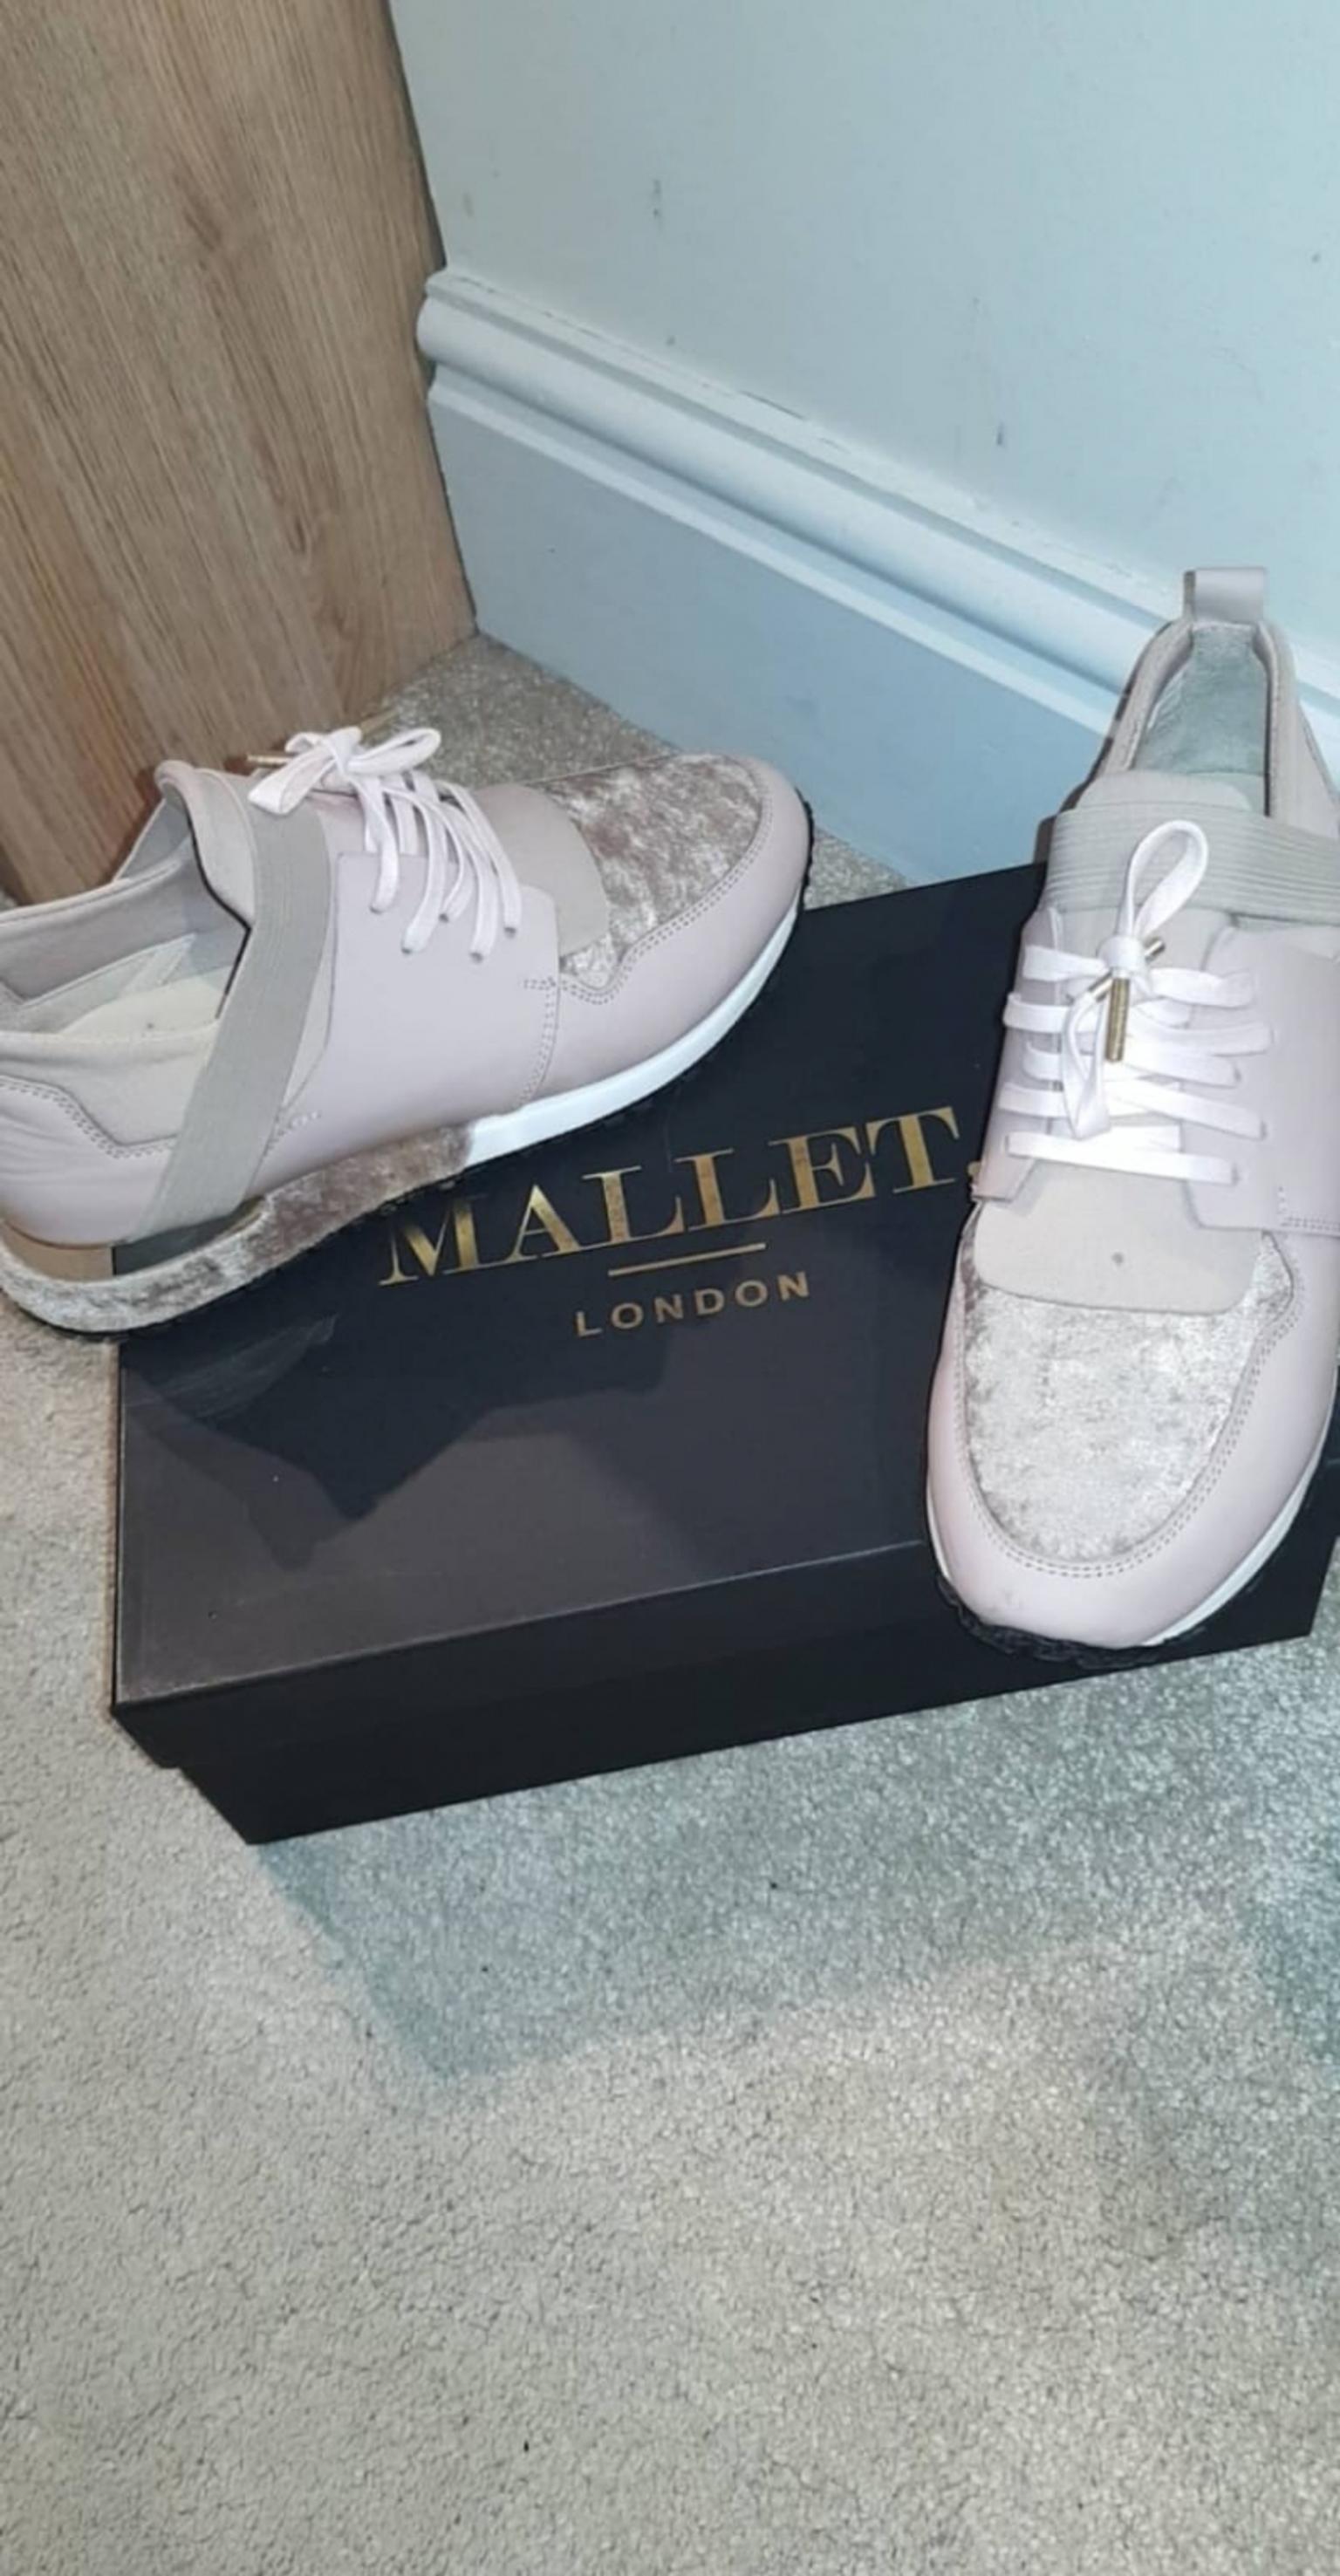 Ladies Mallet trainers in BL1 Bolton 